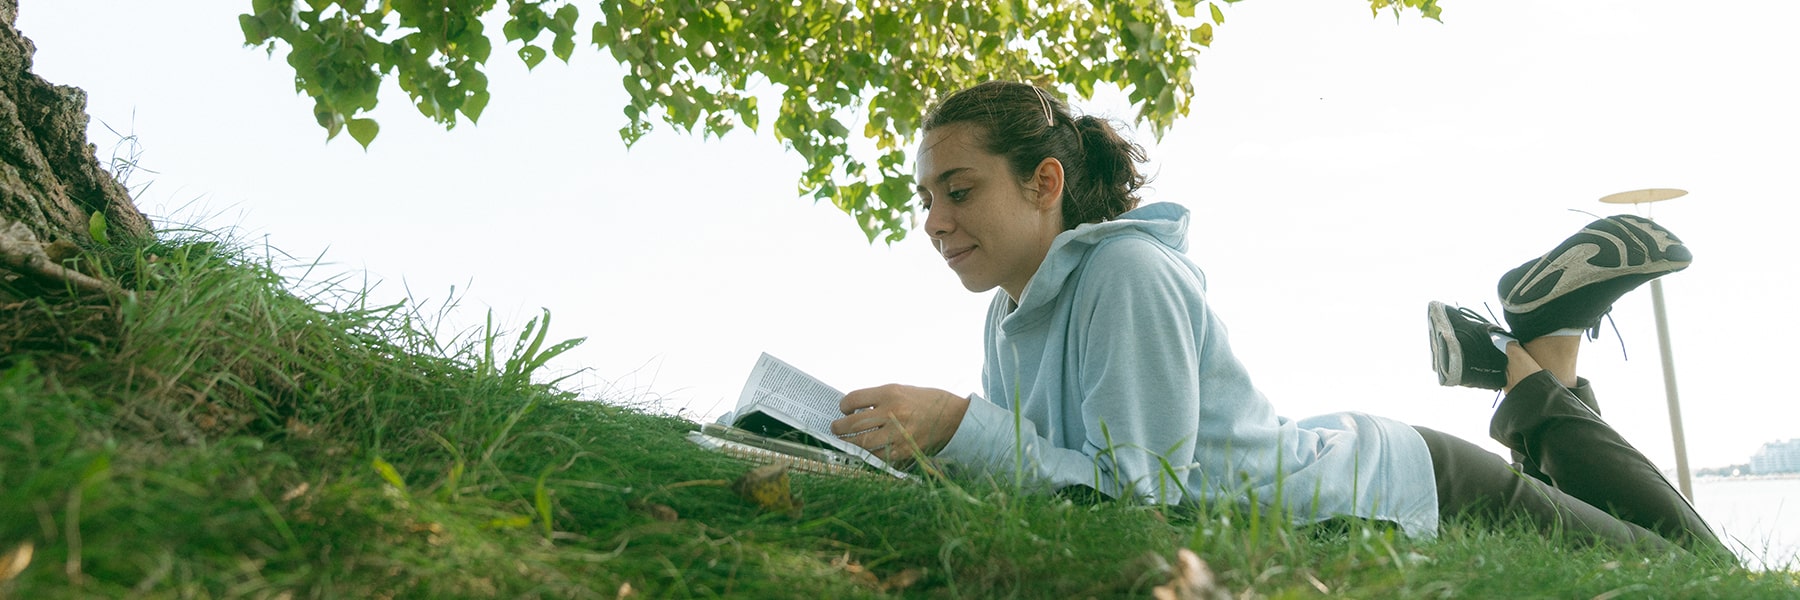 Student reads book under a tree.